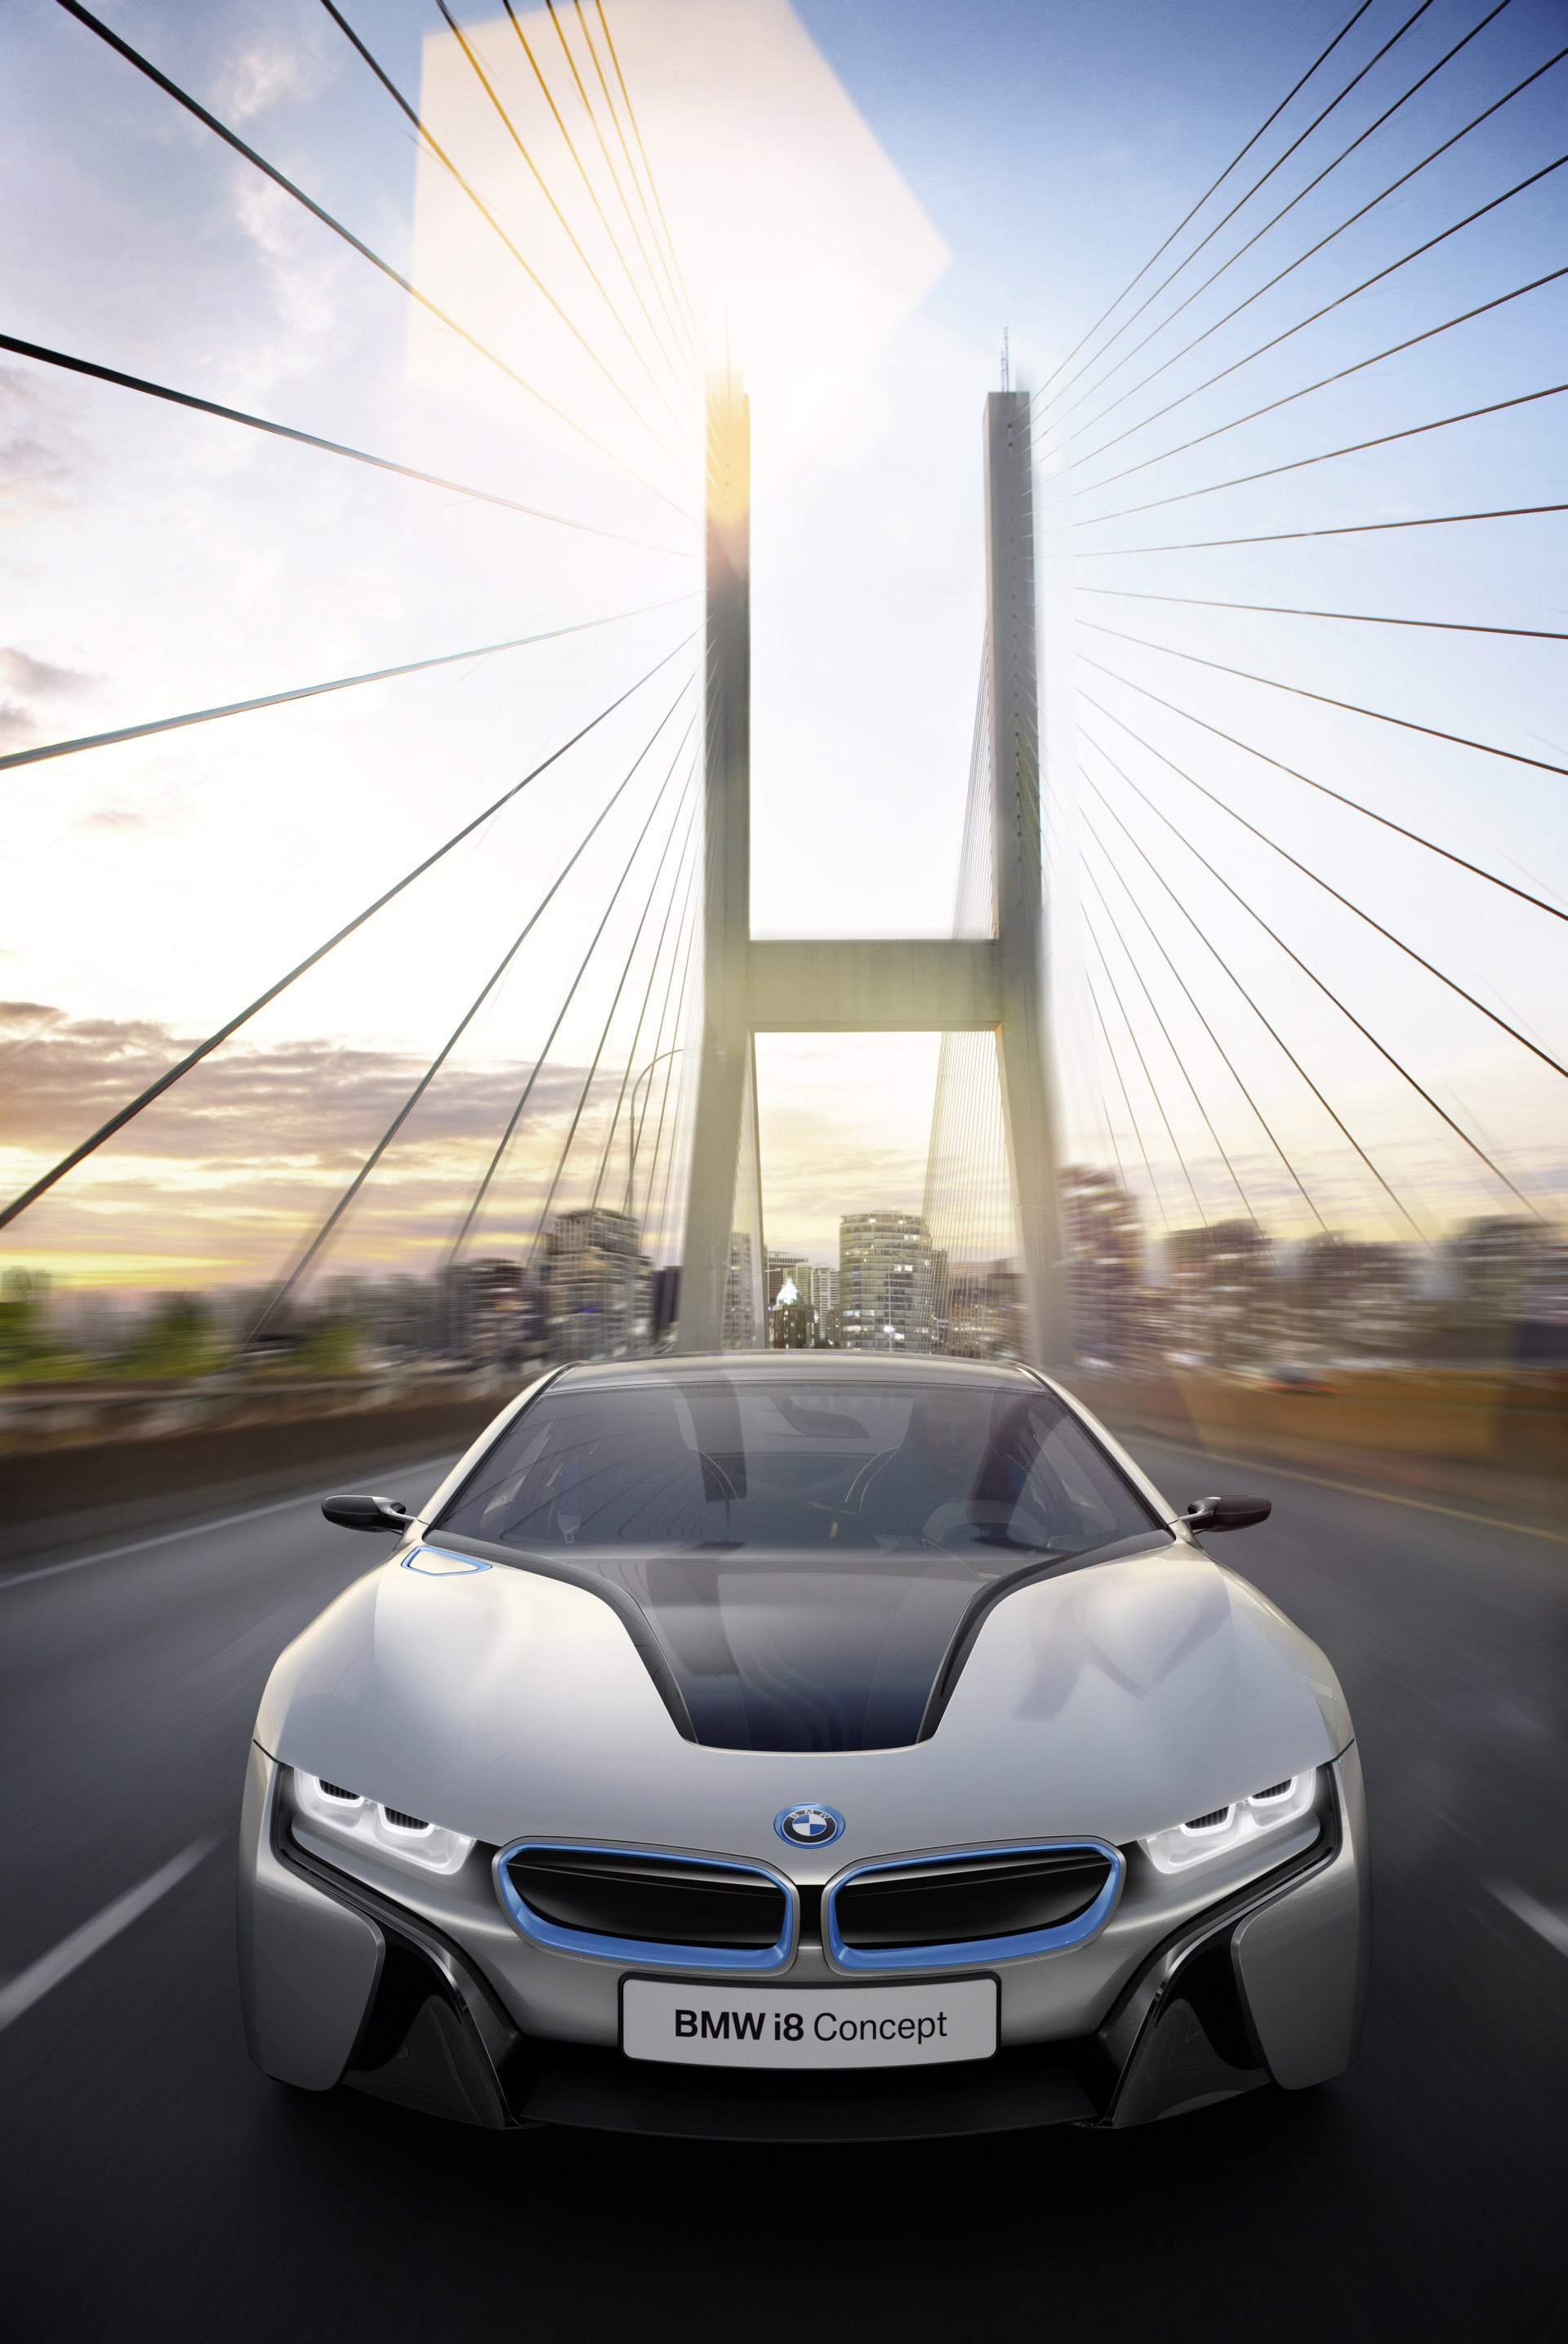 BMW i8 Concept 2011, High-resolution picture, Futuristic car design, Unprecedented innovation, Visionary engineering, 1920x2870 HD Handy